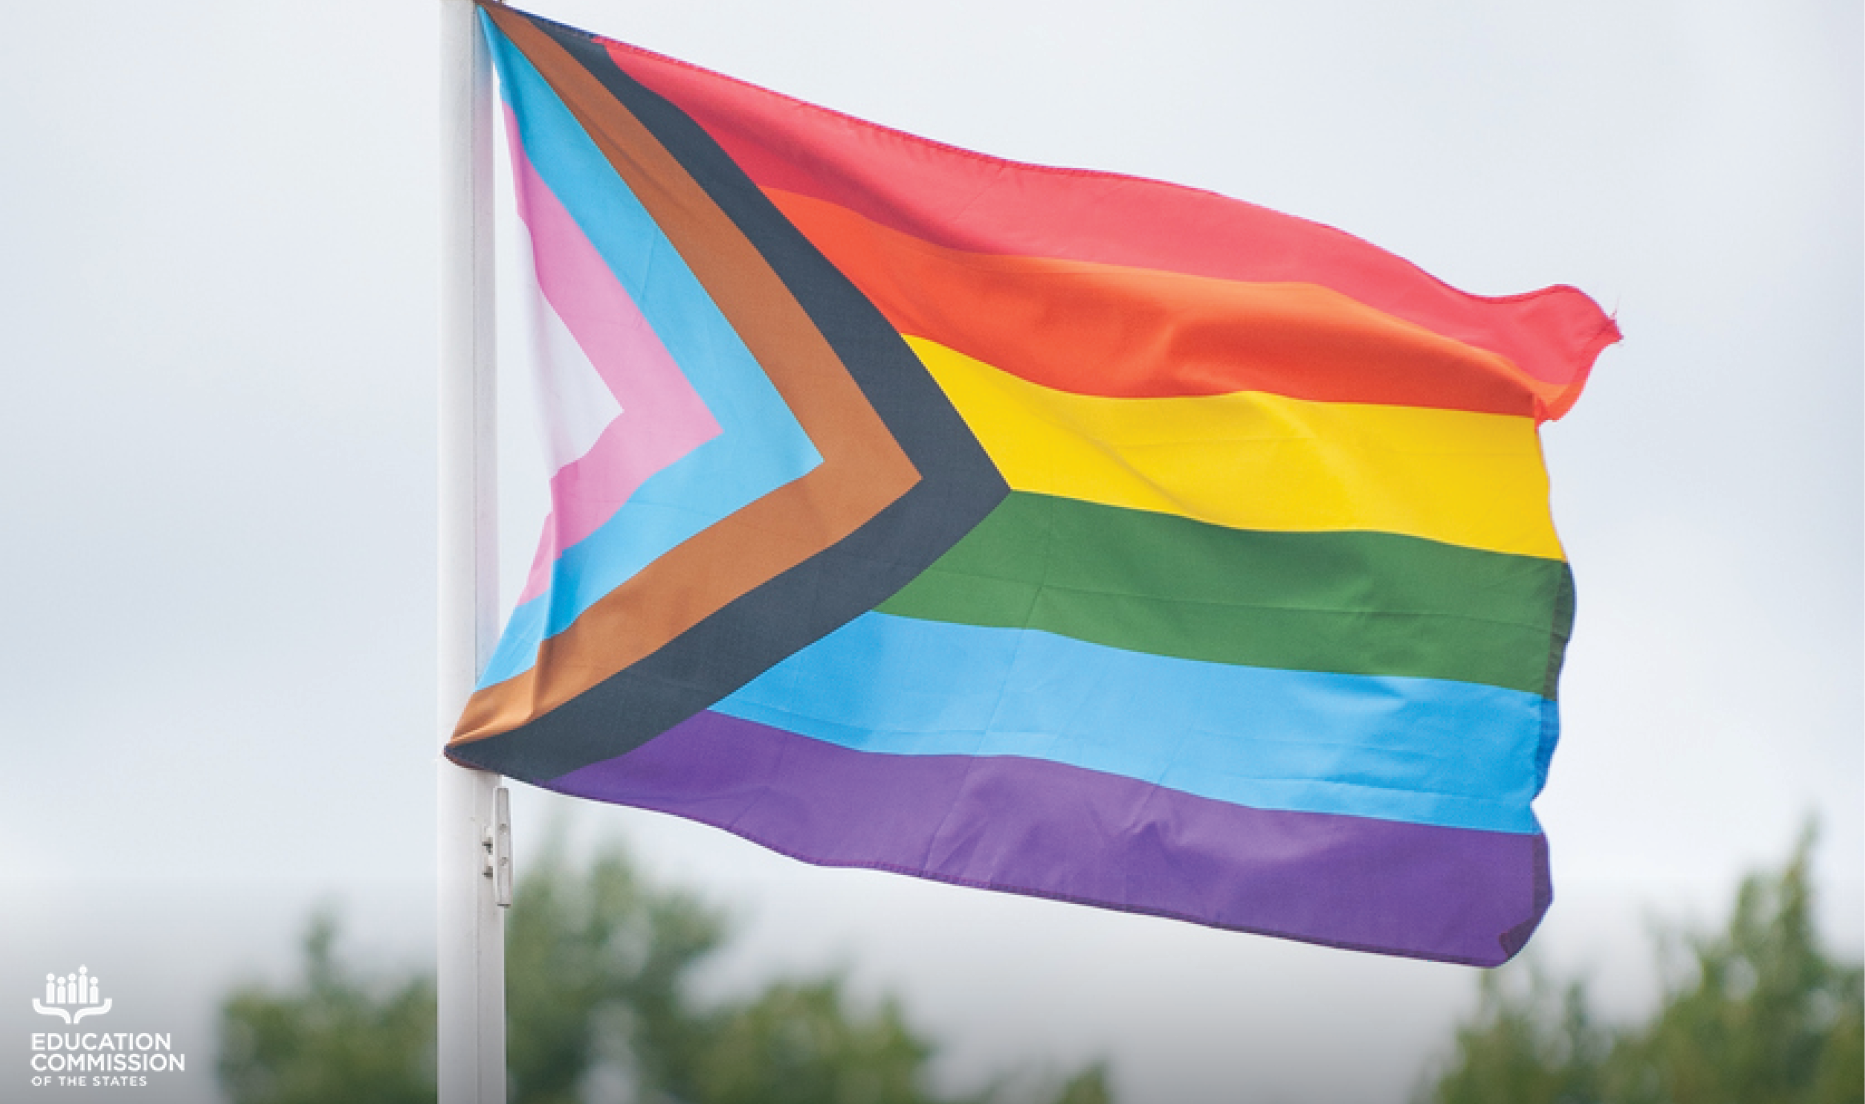 This picture features the multicolored Progress Pride Flag moving in the wind, attached to a white pole. The blurred background is a gray sky with green treetops peaking up from the bottom of the picture.